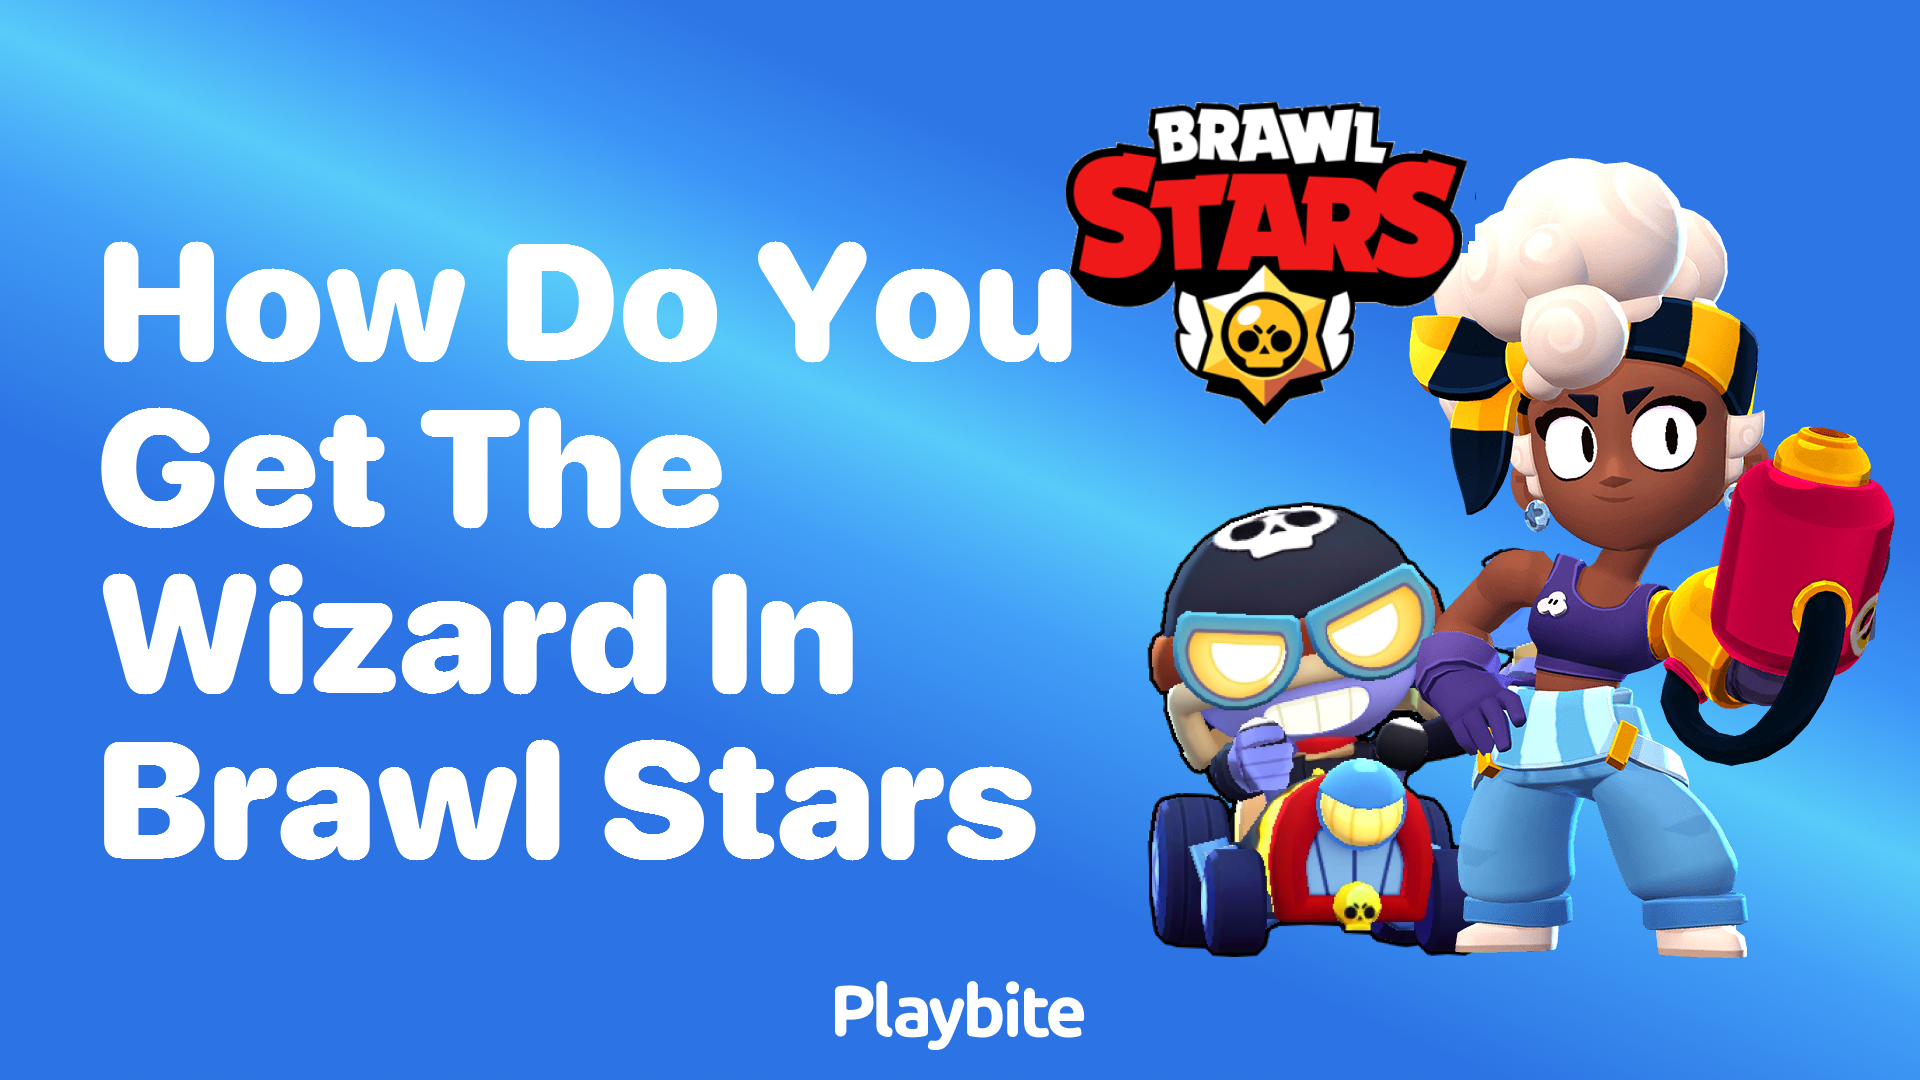 How Do You Get the Wizard in Brawl Stars?